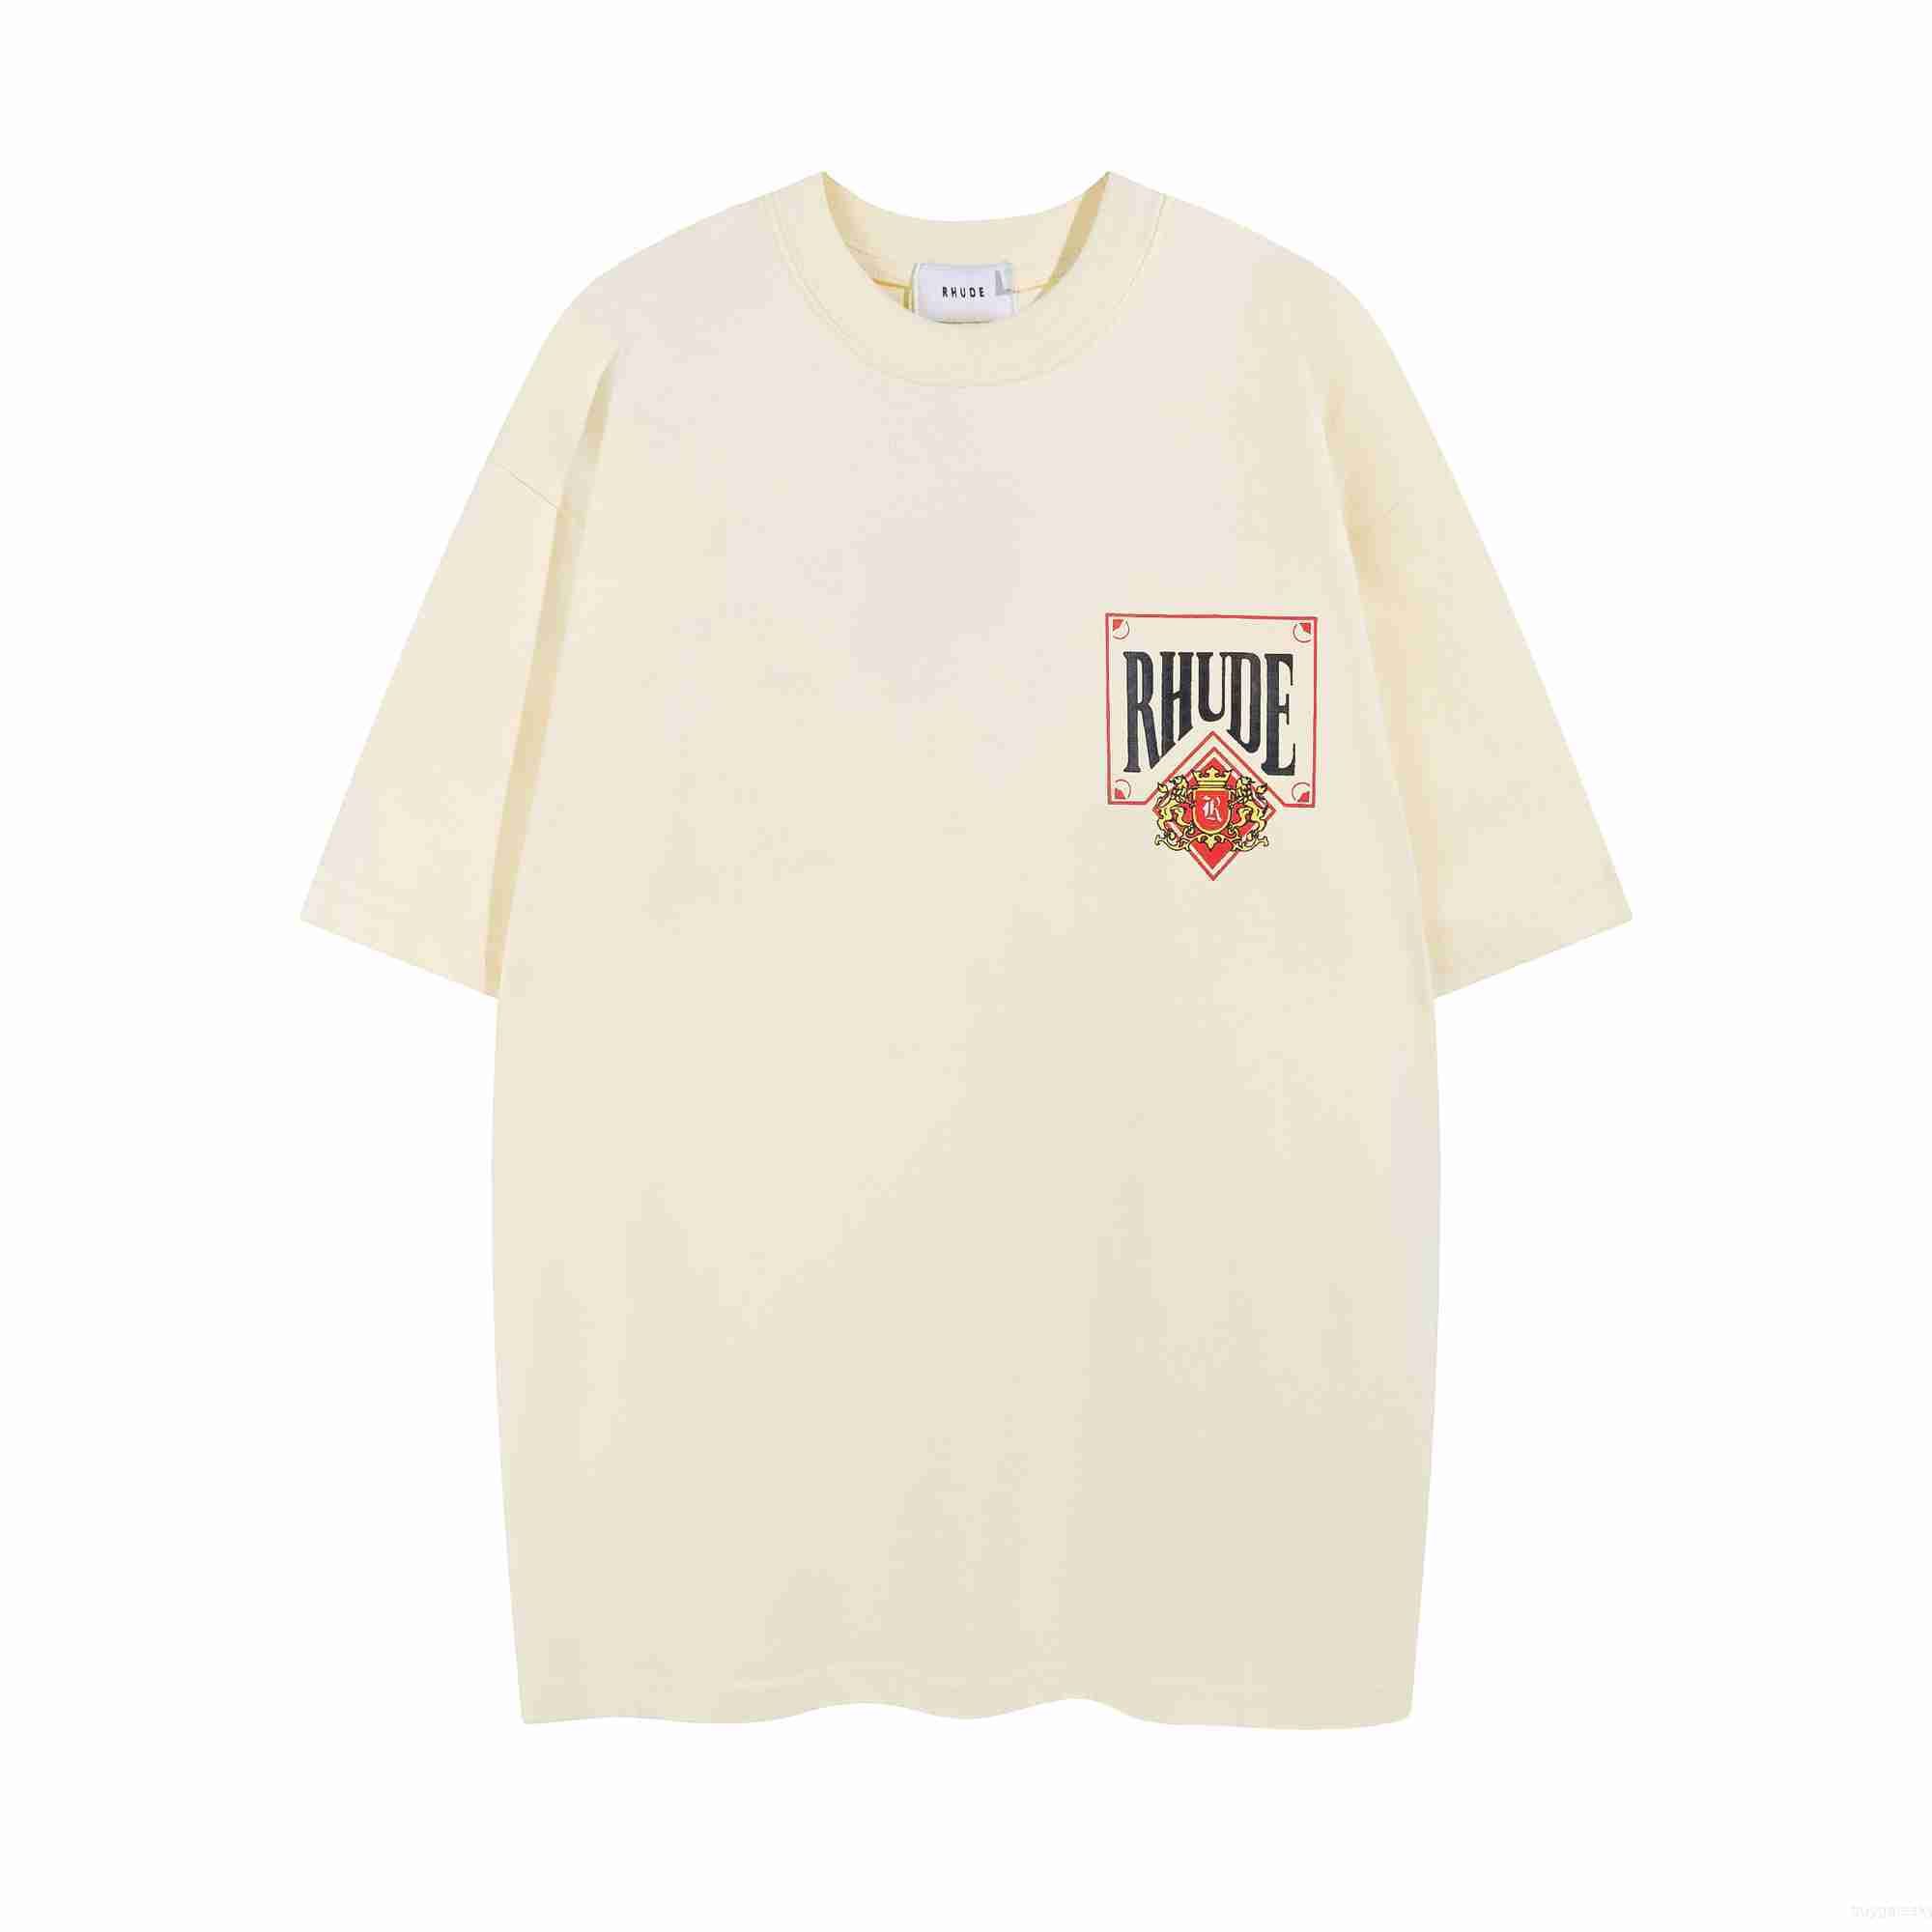 New Rhude Mens And Women T Shirt Letter Printed Graphic Tee Casual Cotton T  Shirt Designer Top Short Sleeve Hip Hop Streetwear S Xl Au2h From  Buygatesky, $23.46